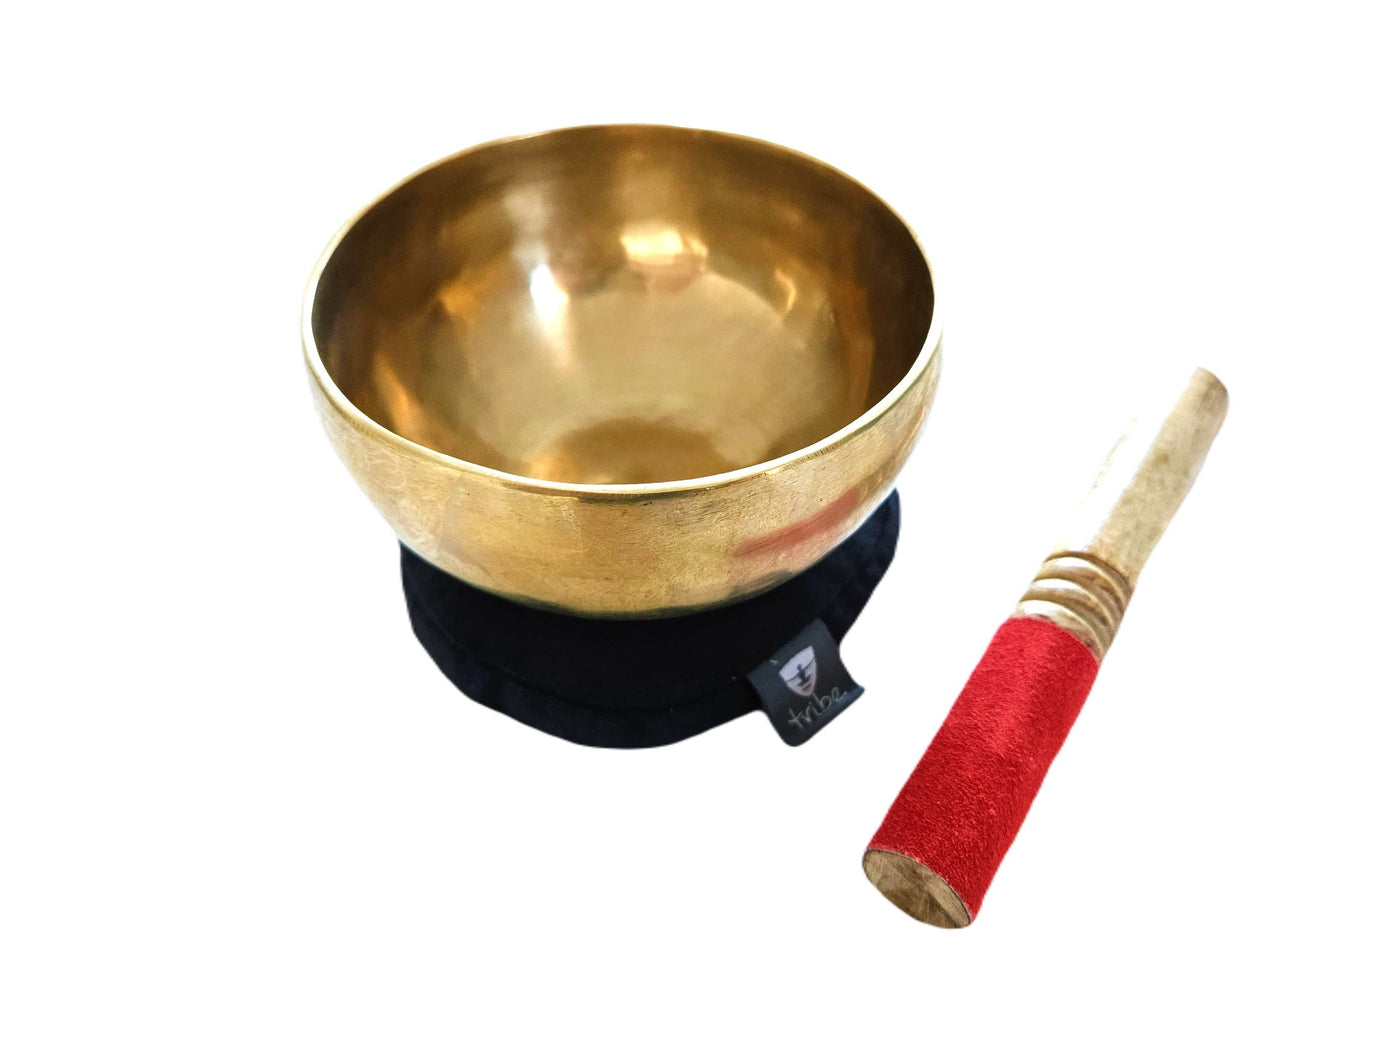 Tibetan Singing Bowl - bowl sitting on cotton pad with wooden striker beside them - TRIBE | Eco Yoga Store